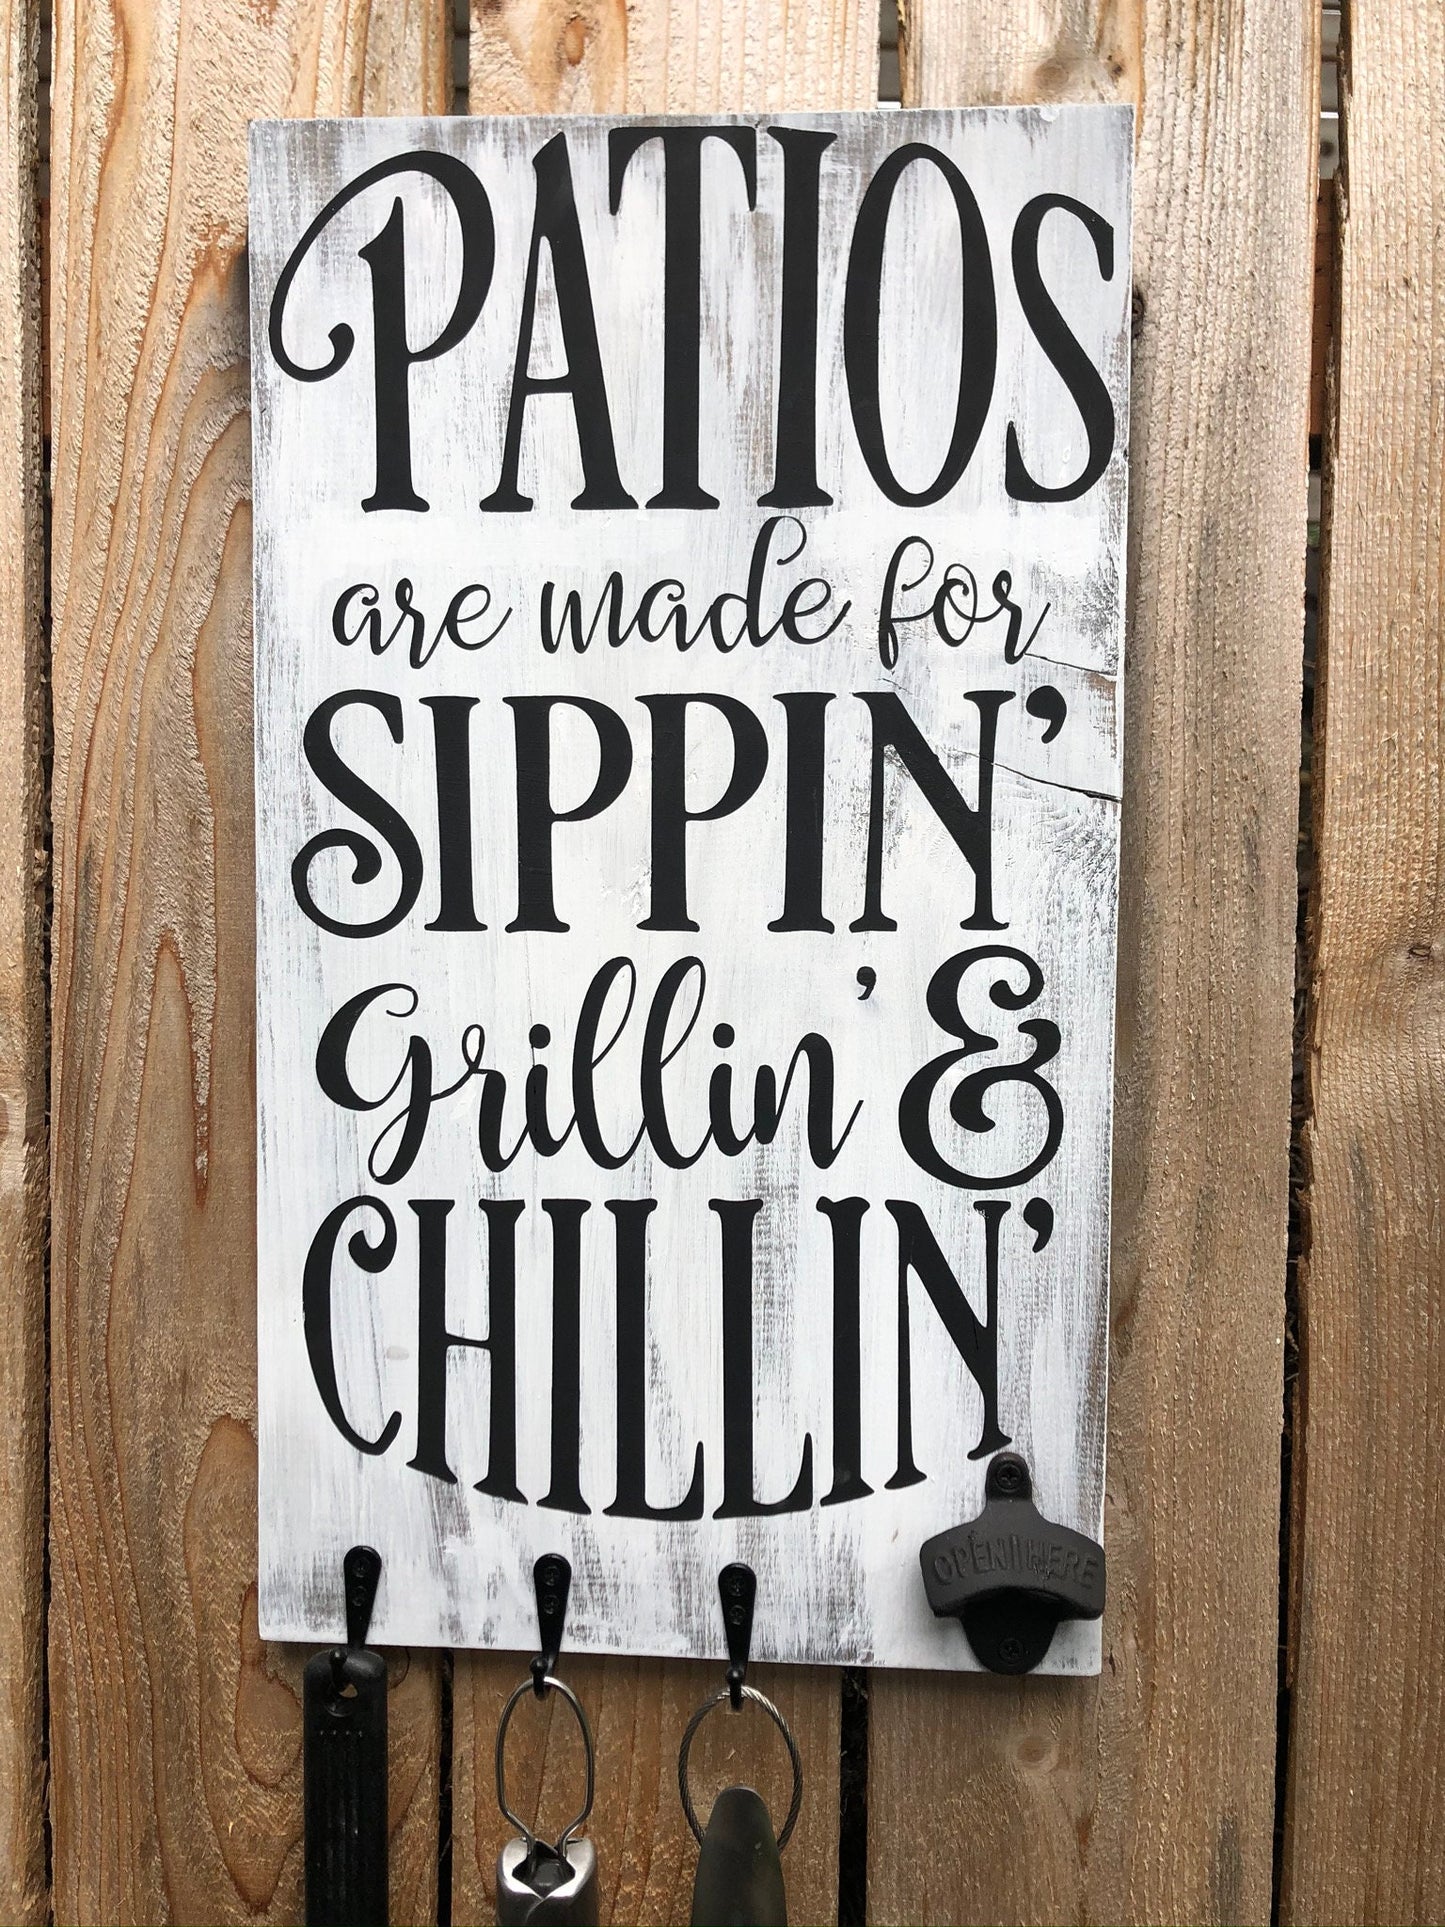 Patios Are For Sippin' Grillin' and Chillin'- BBQ Decor -Outdoor Decoration - Gift for Him - Patio Porch Deco